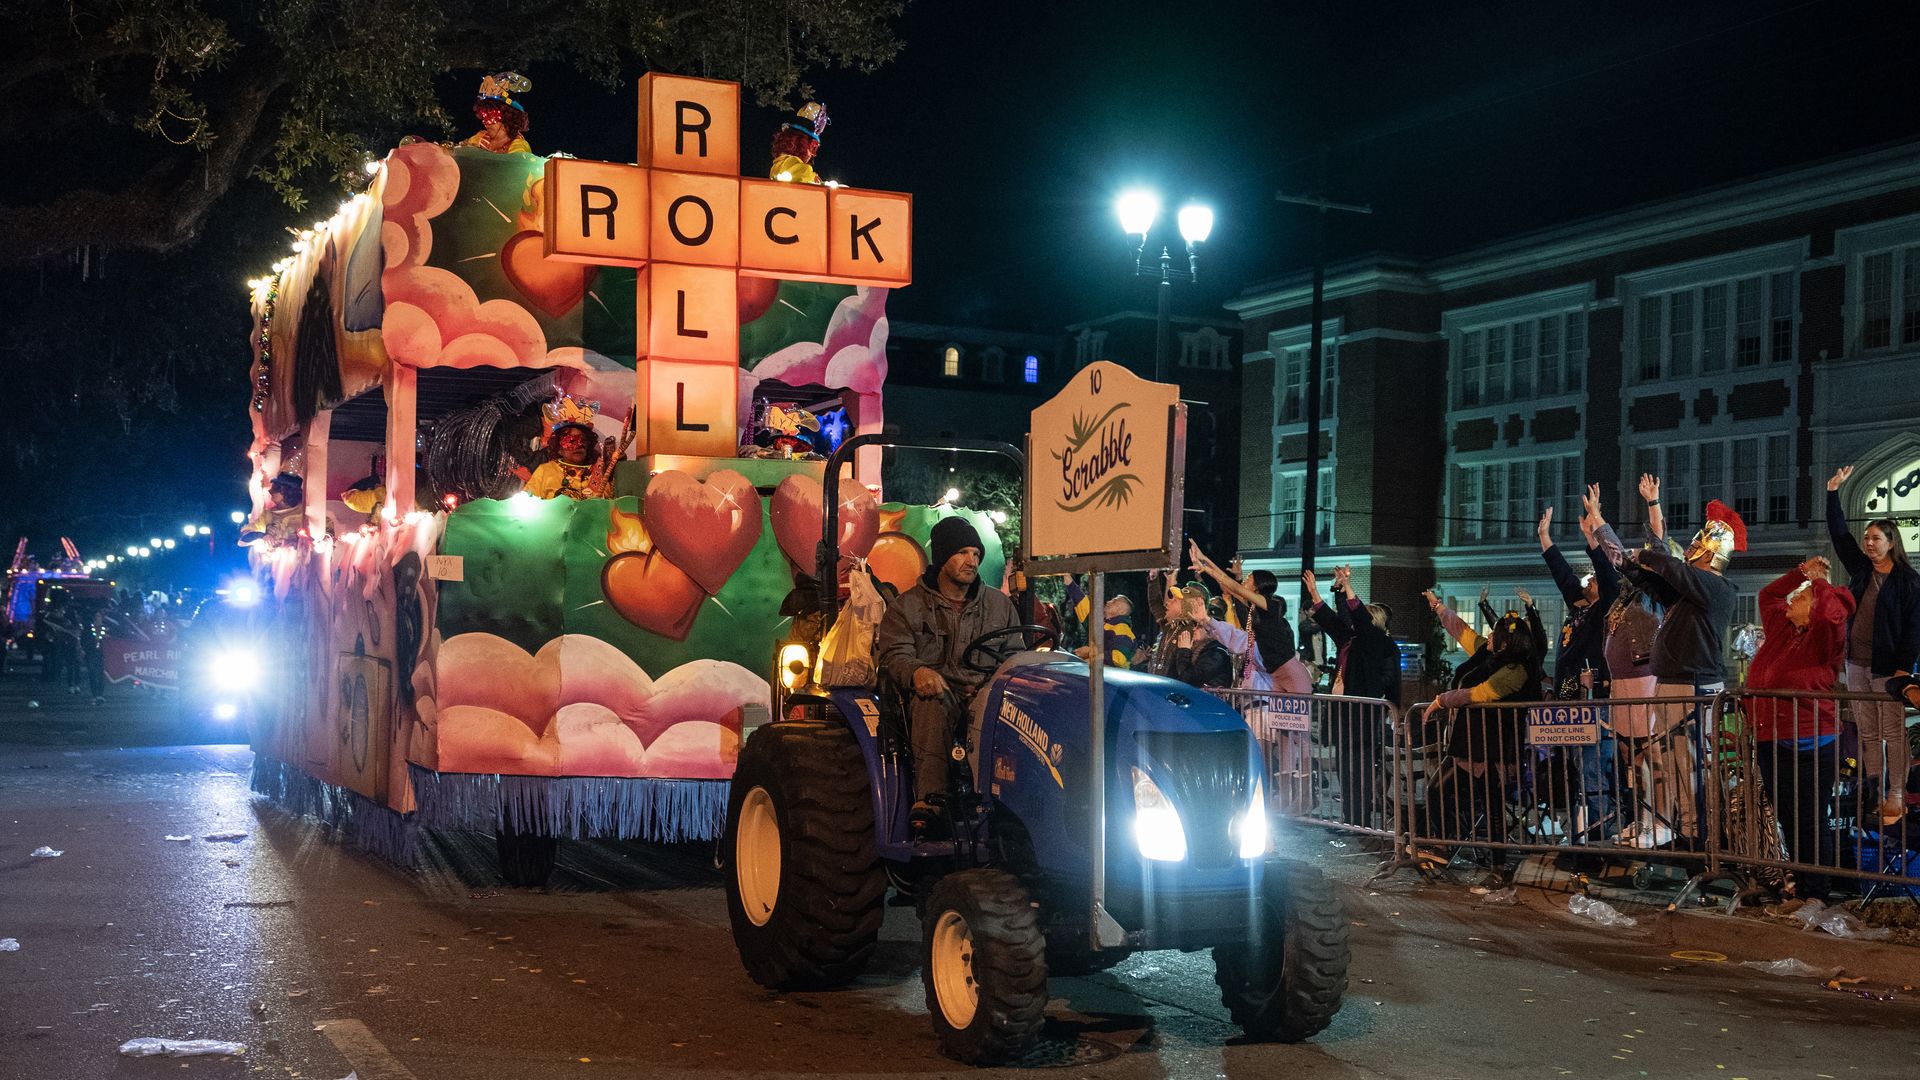 A tractor pulls a parade float, which is decorated with large Scrabble pieces spelling the words "Rock" and "Roll." Behind barricades are light crowds.